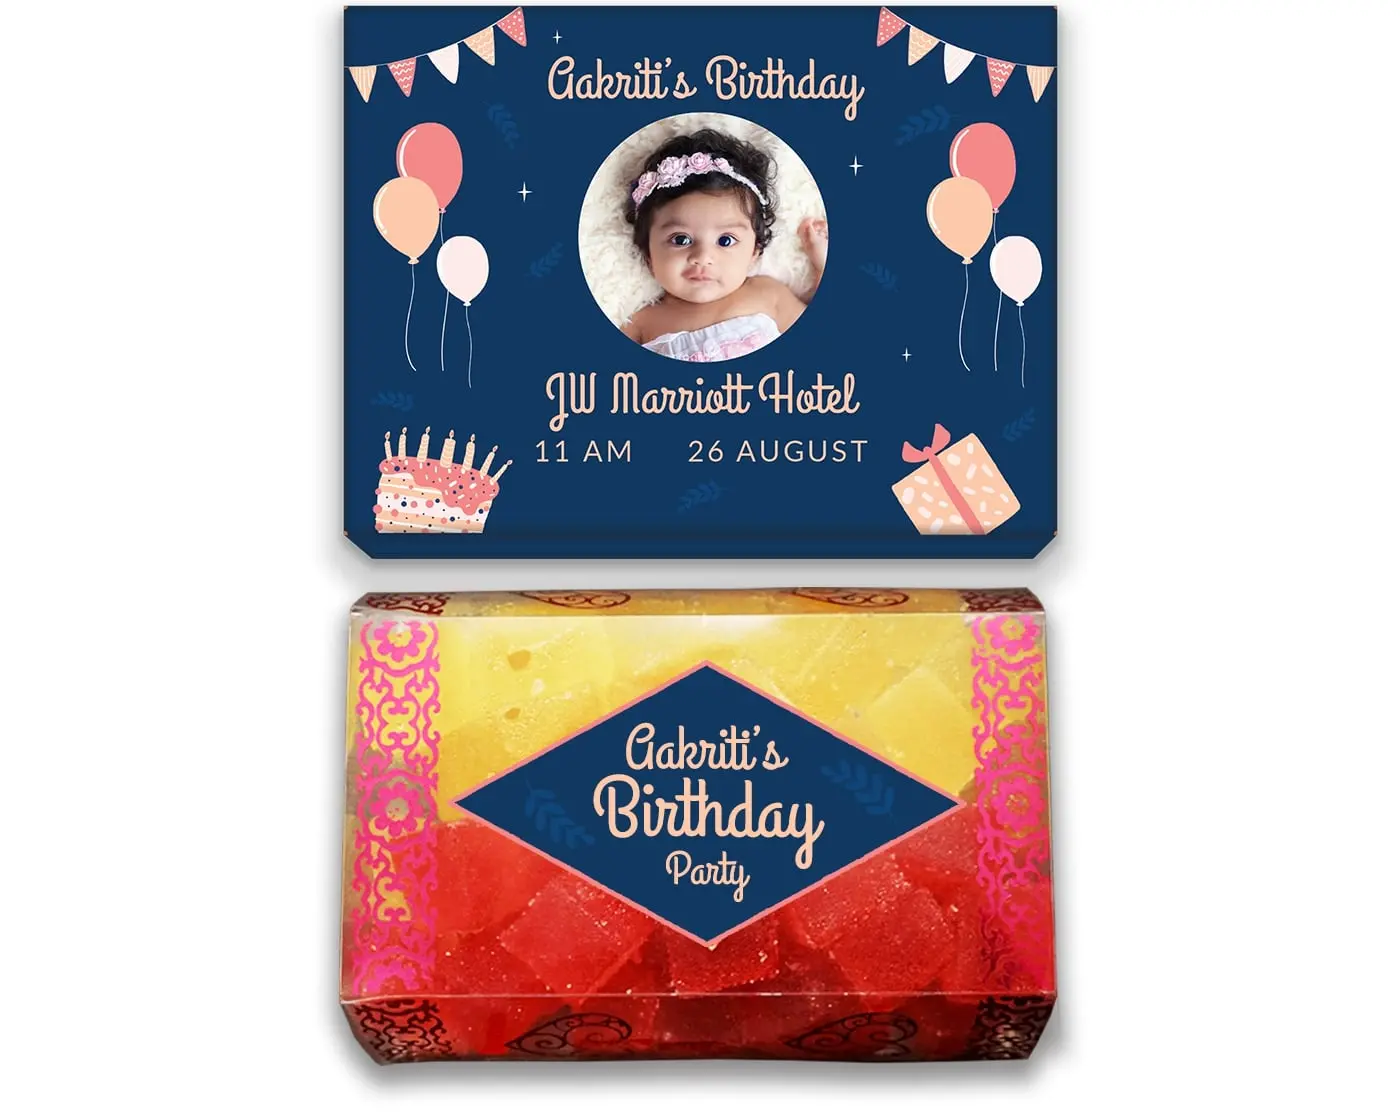 Design Number 9 of Customized Boxes for Birthday Party Invitations